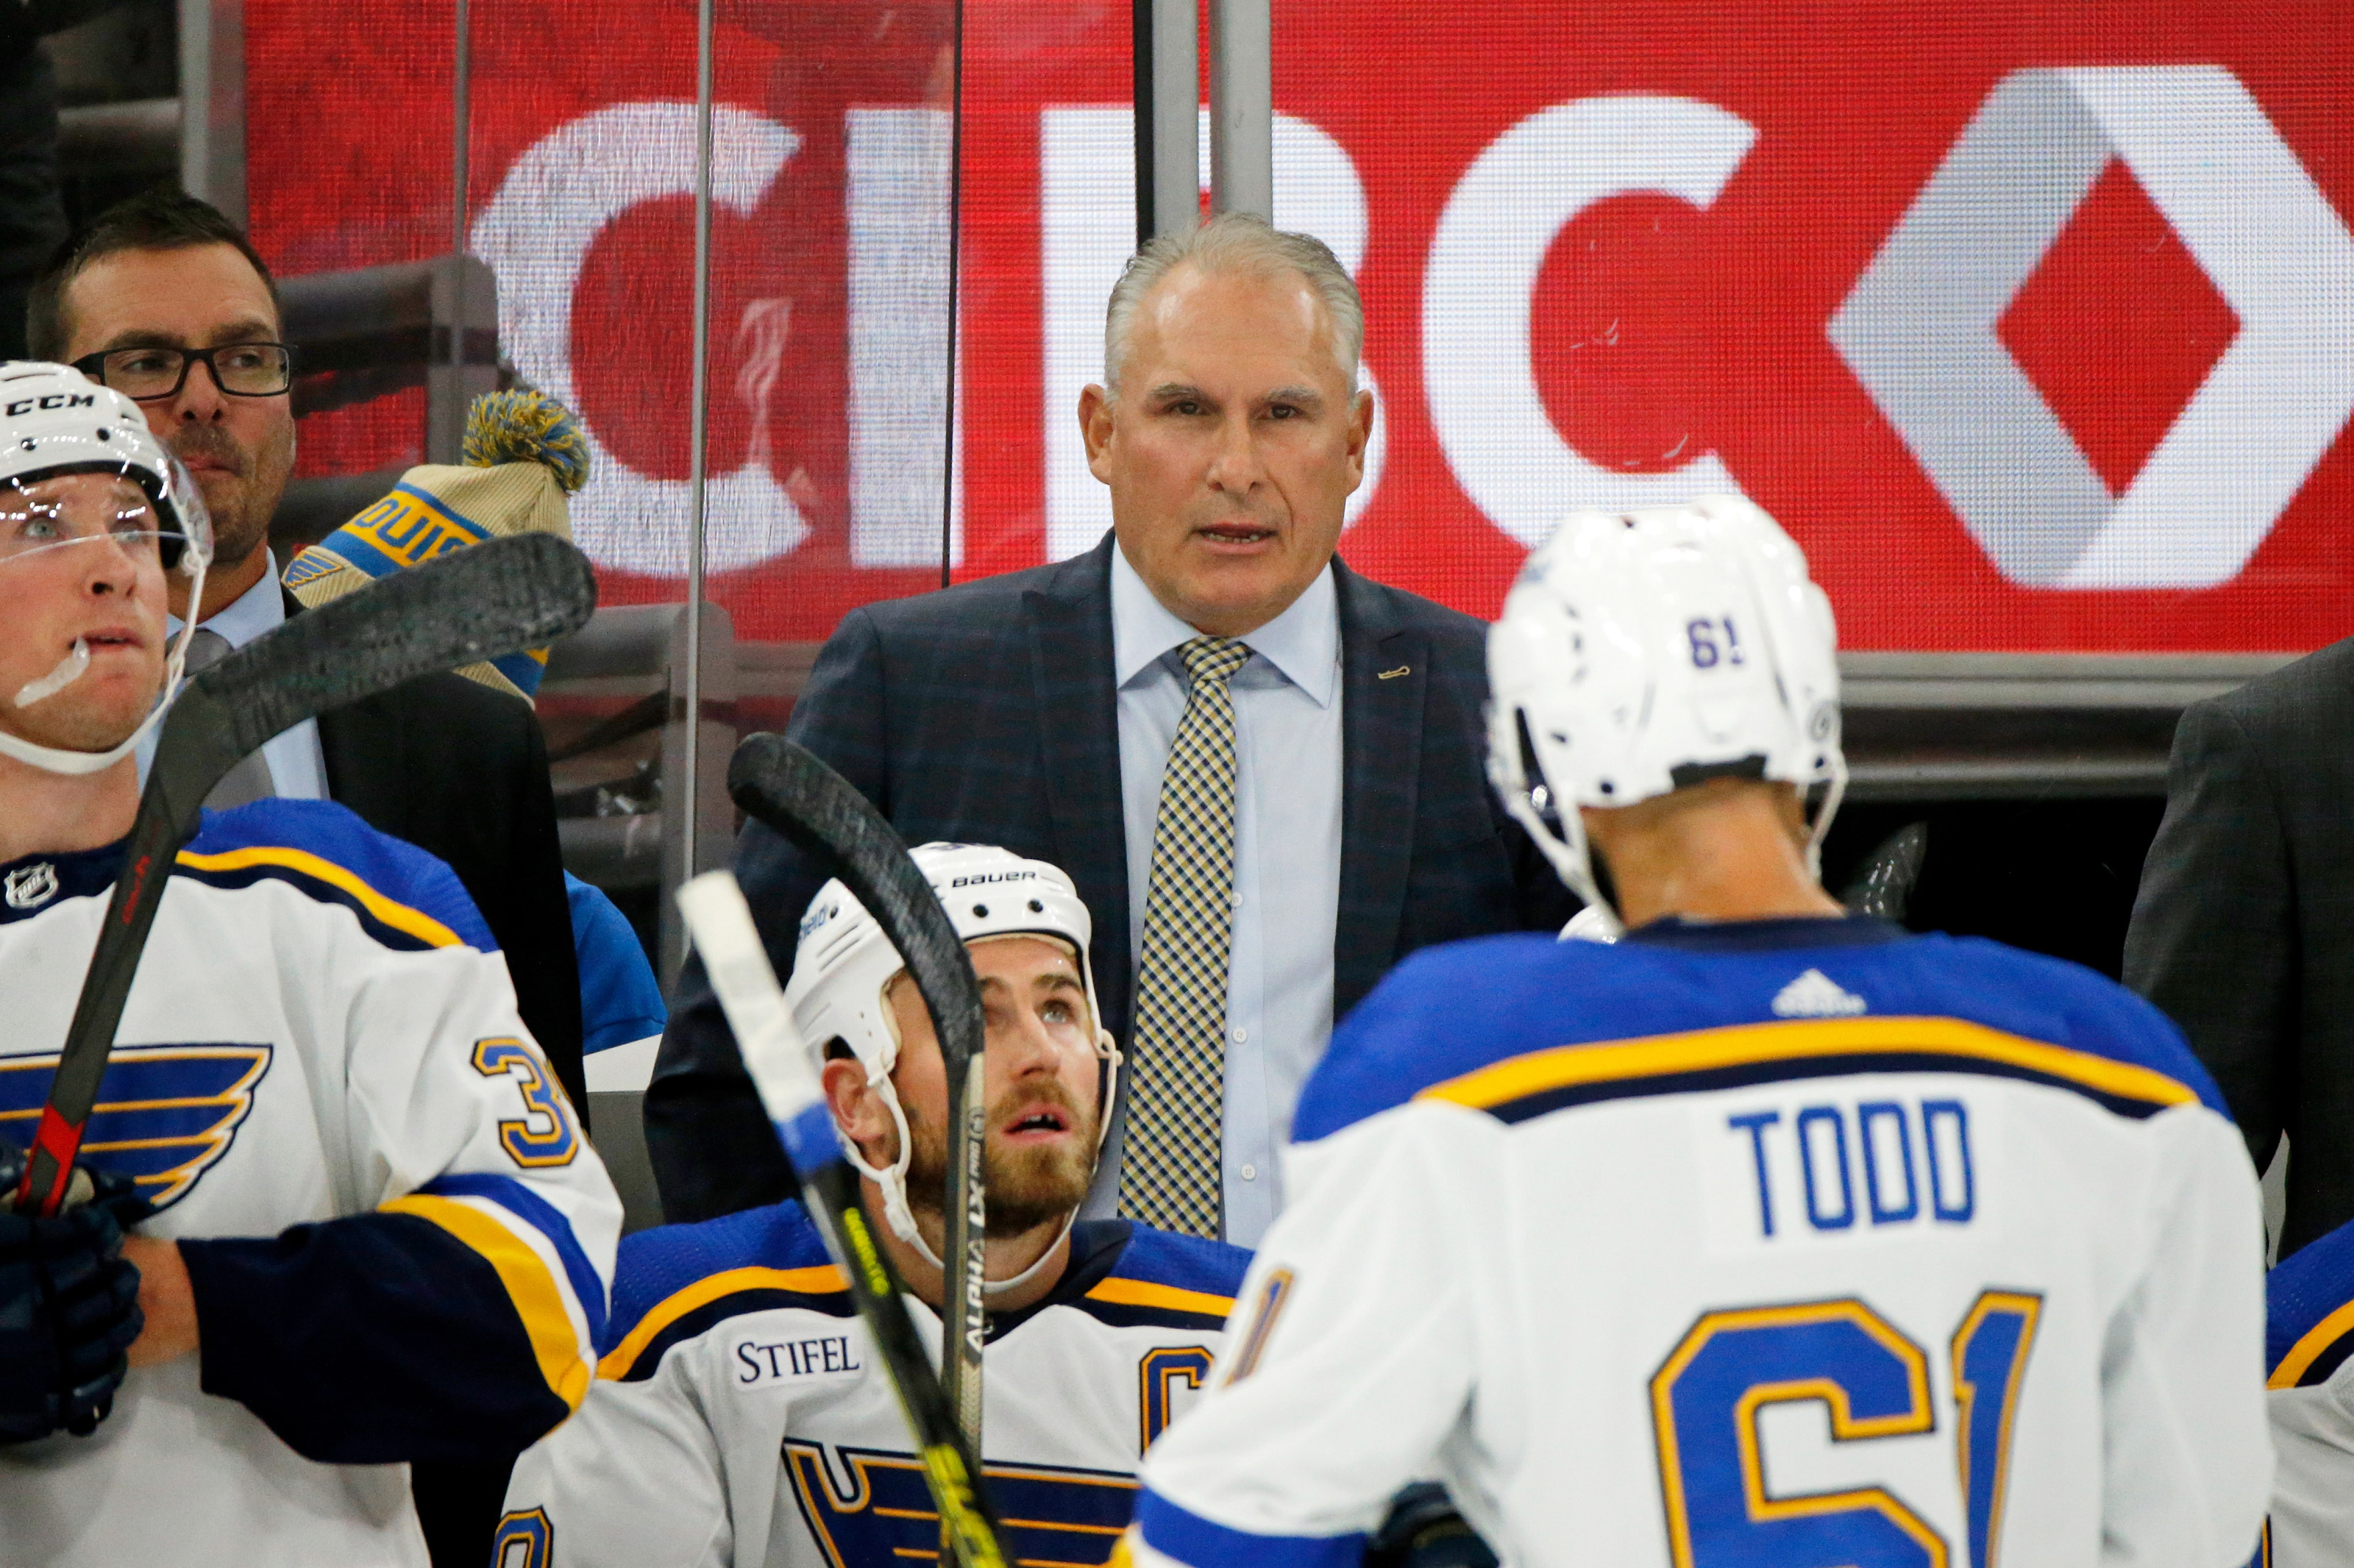 Blues (and especially Craig Berube) will have some fans in Wichita